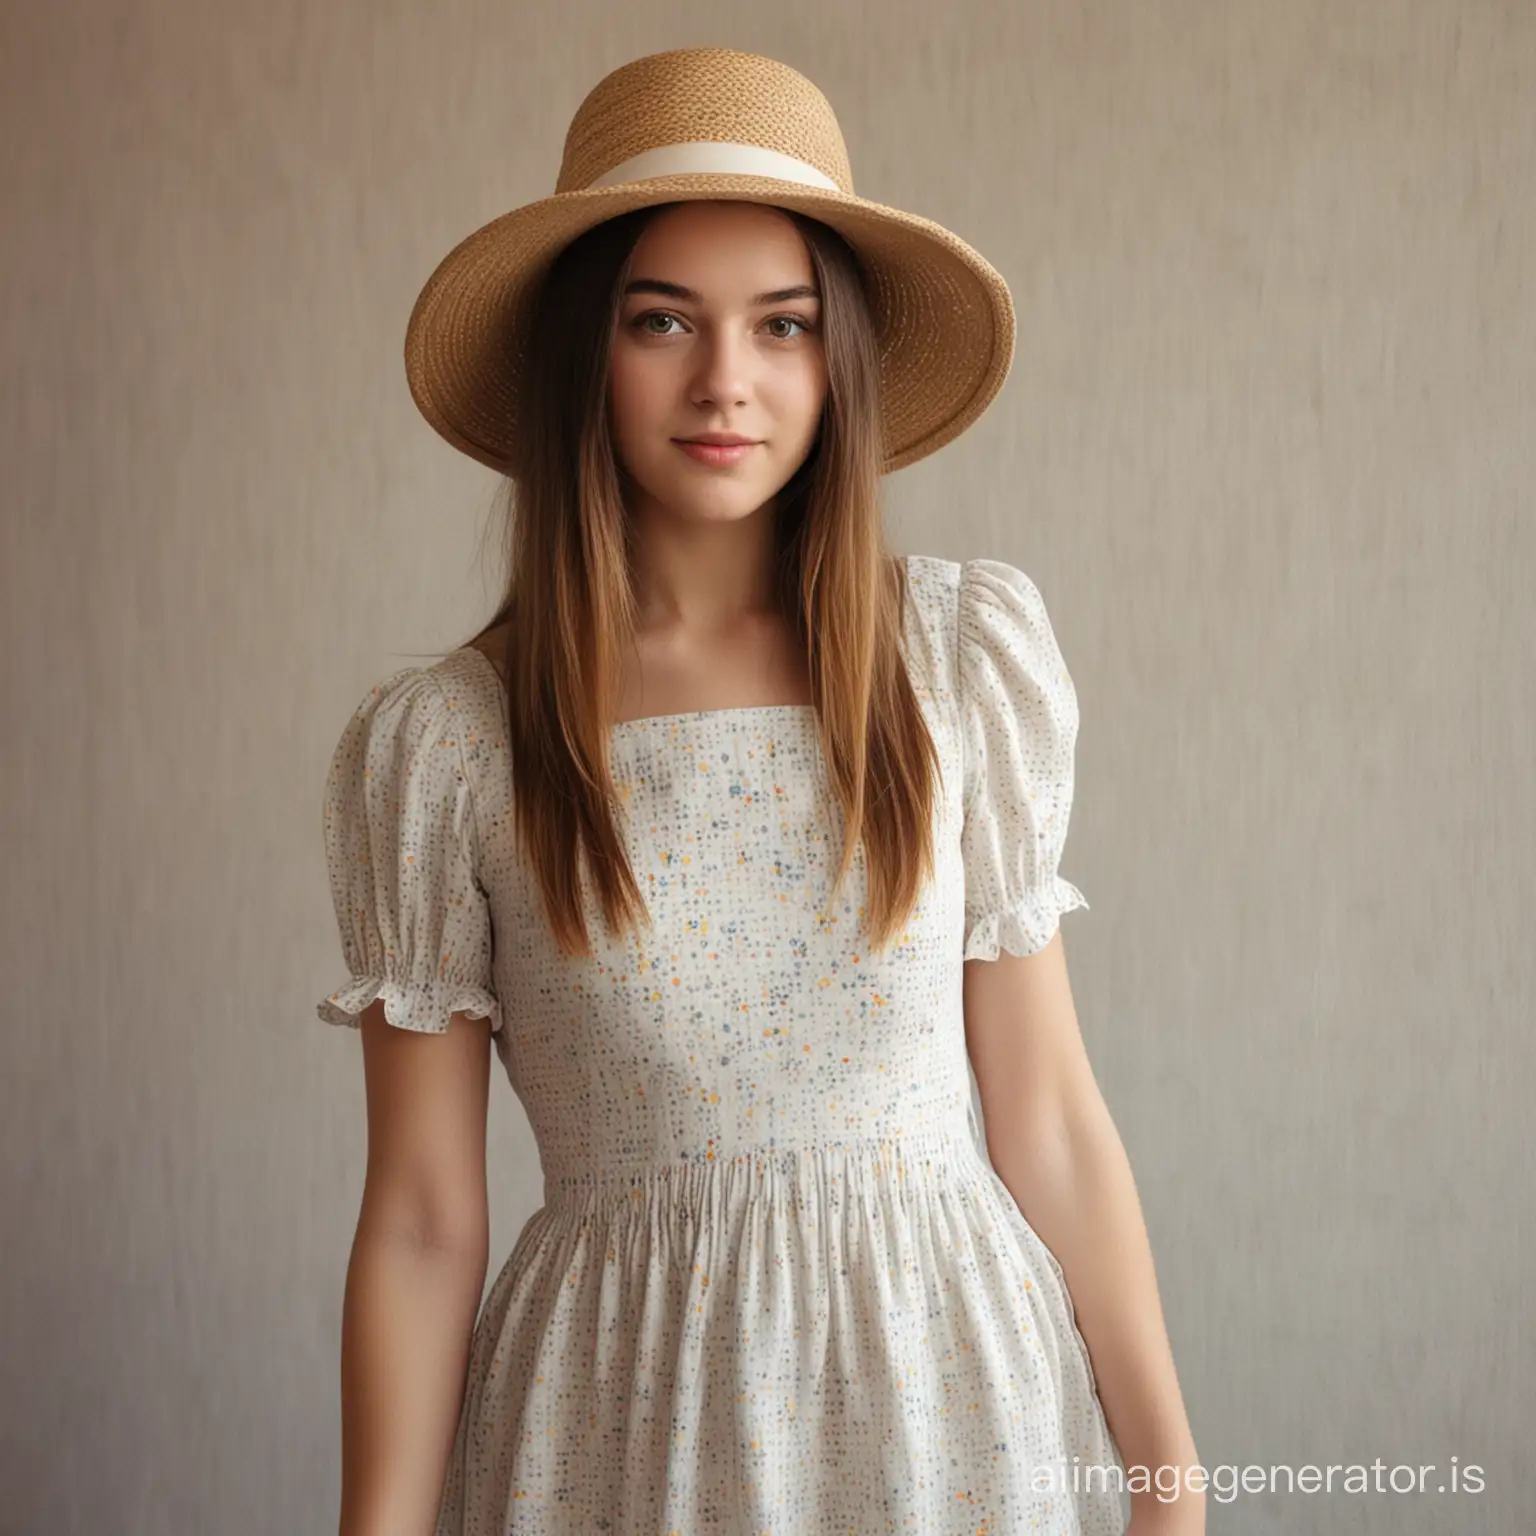 the girl in the hat and in the dress